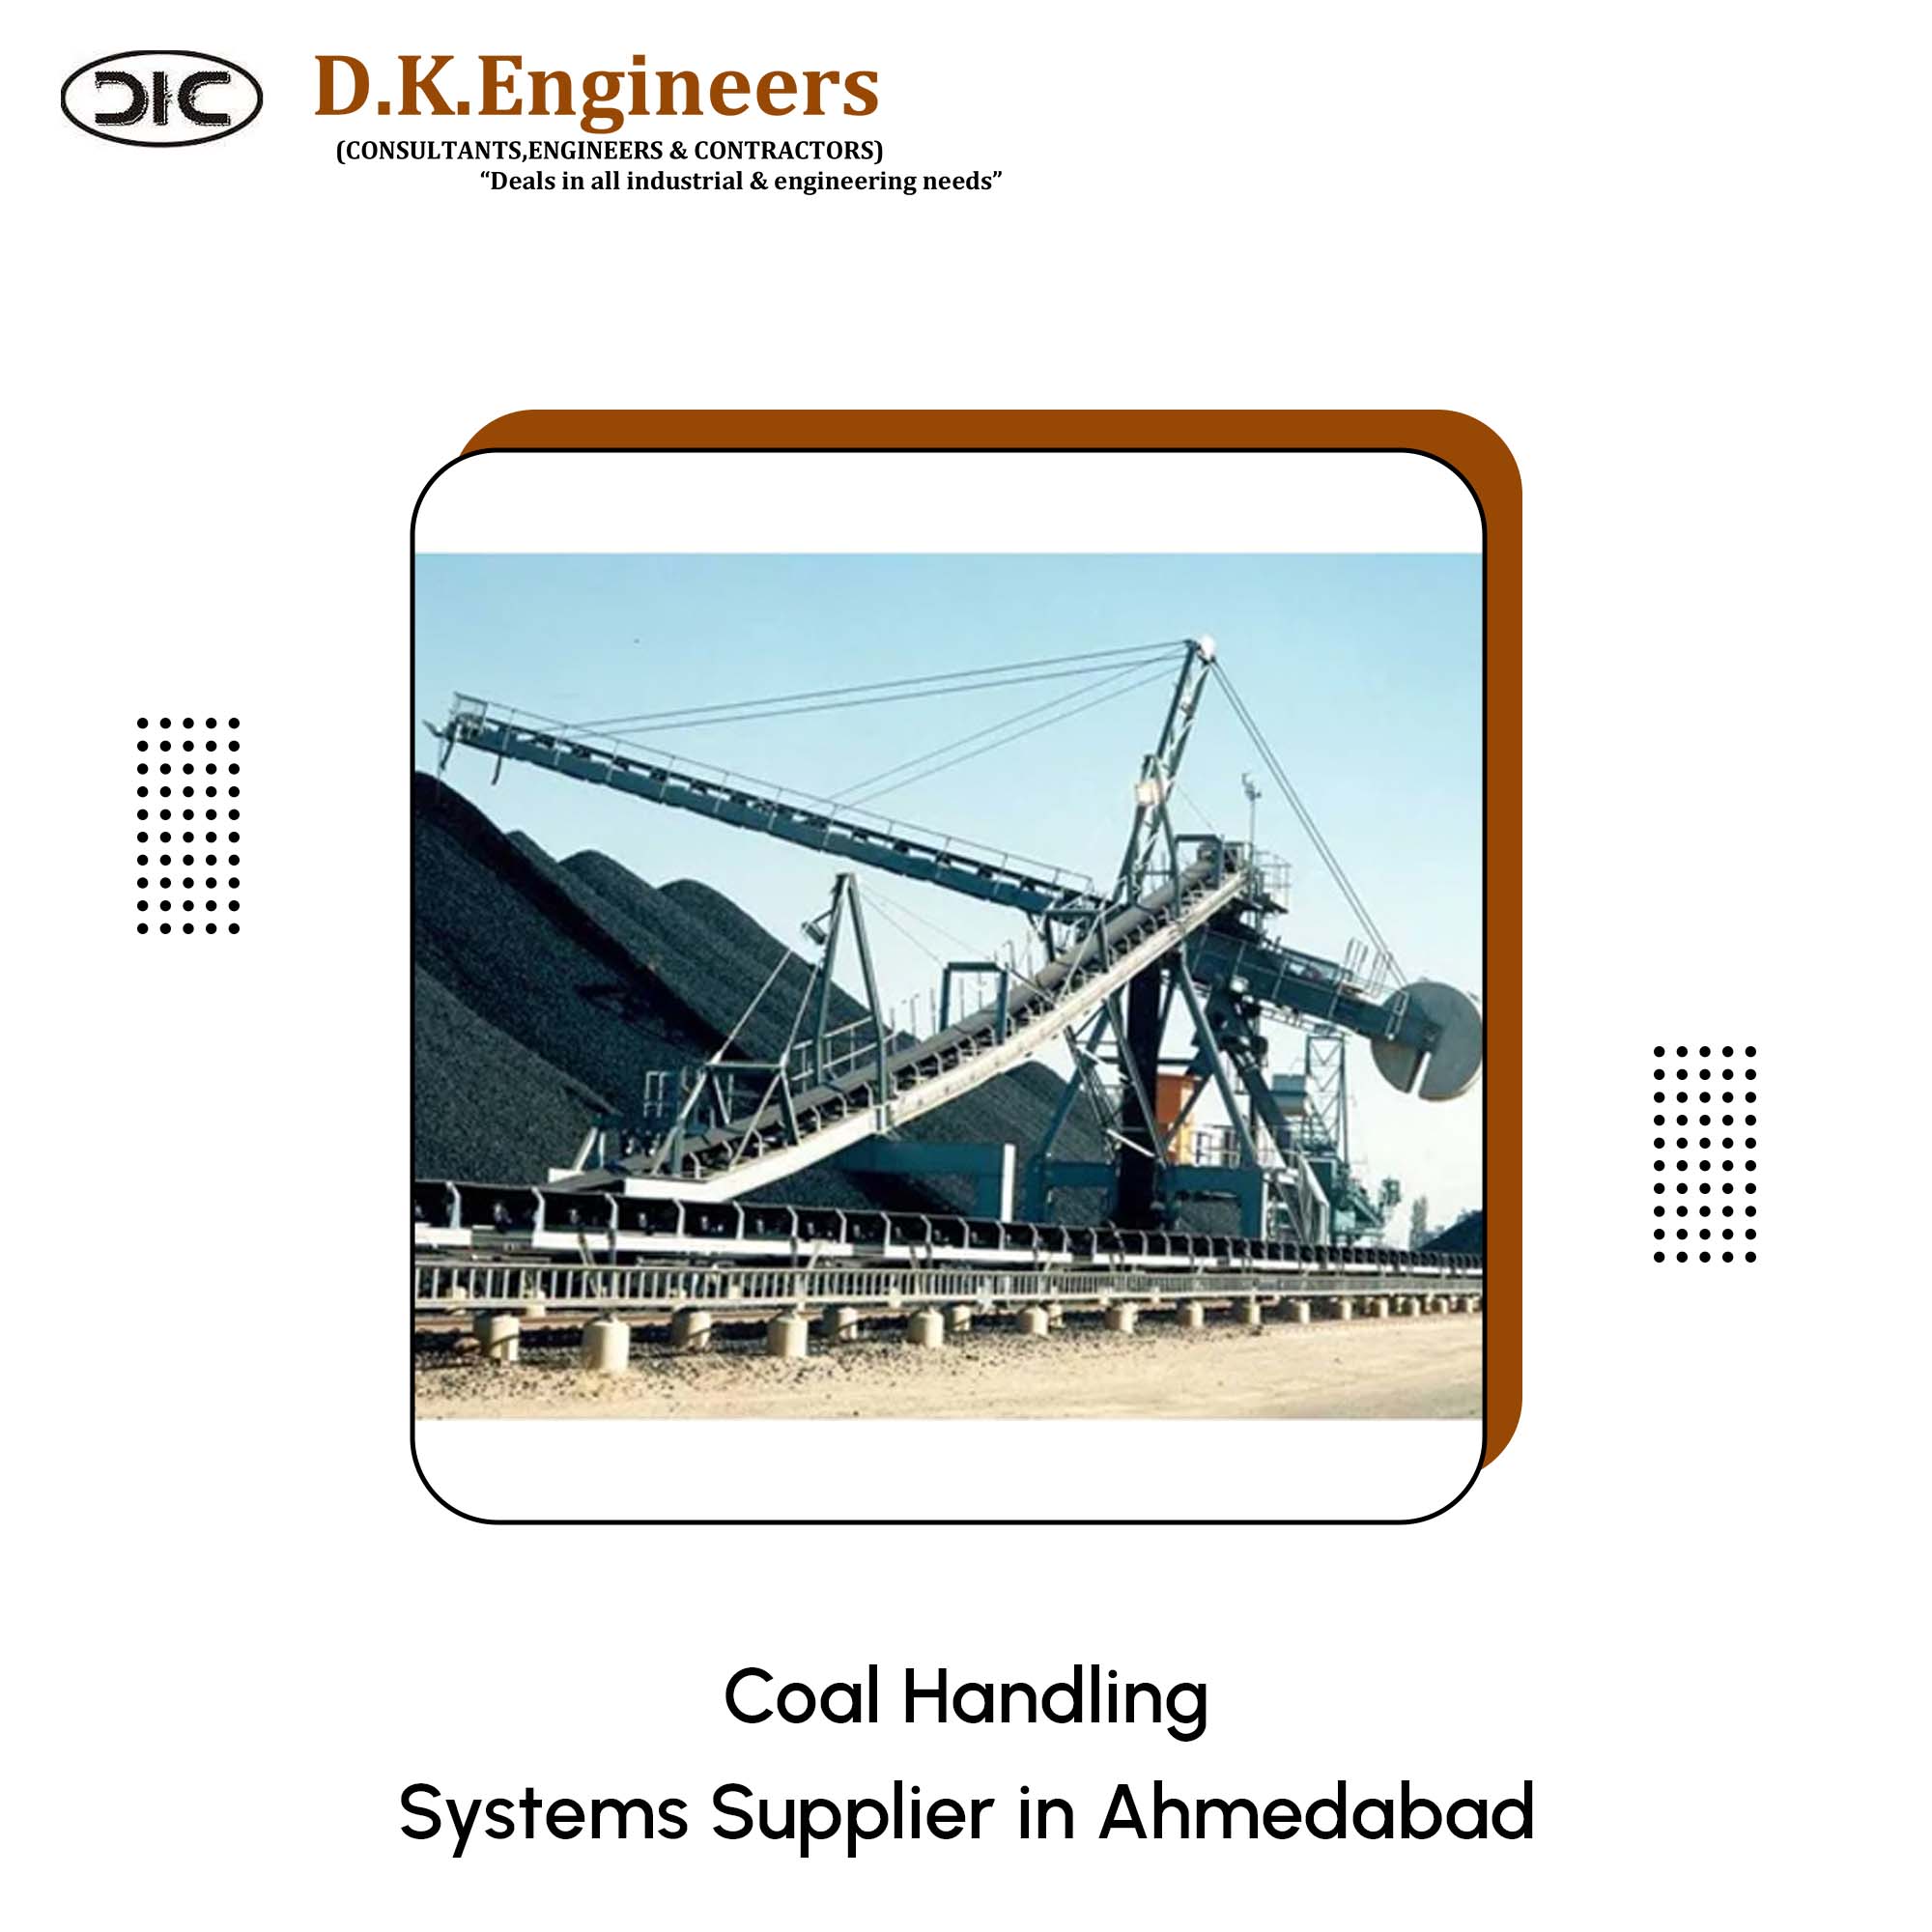 Coal Handling Systems Supplier in Ahmedabad